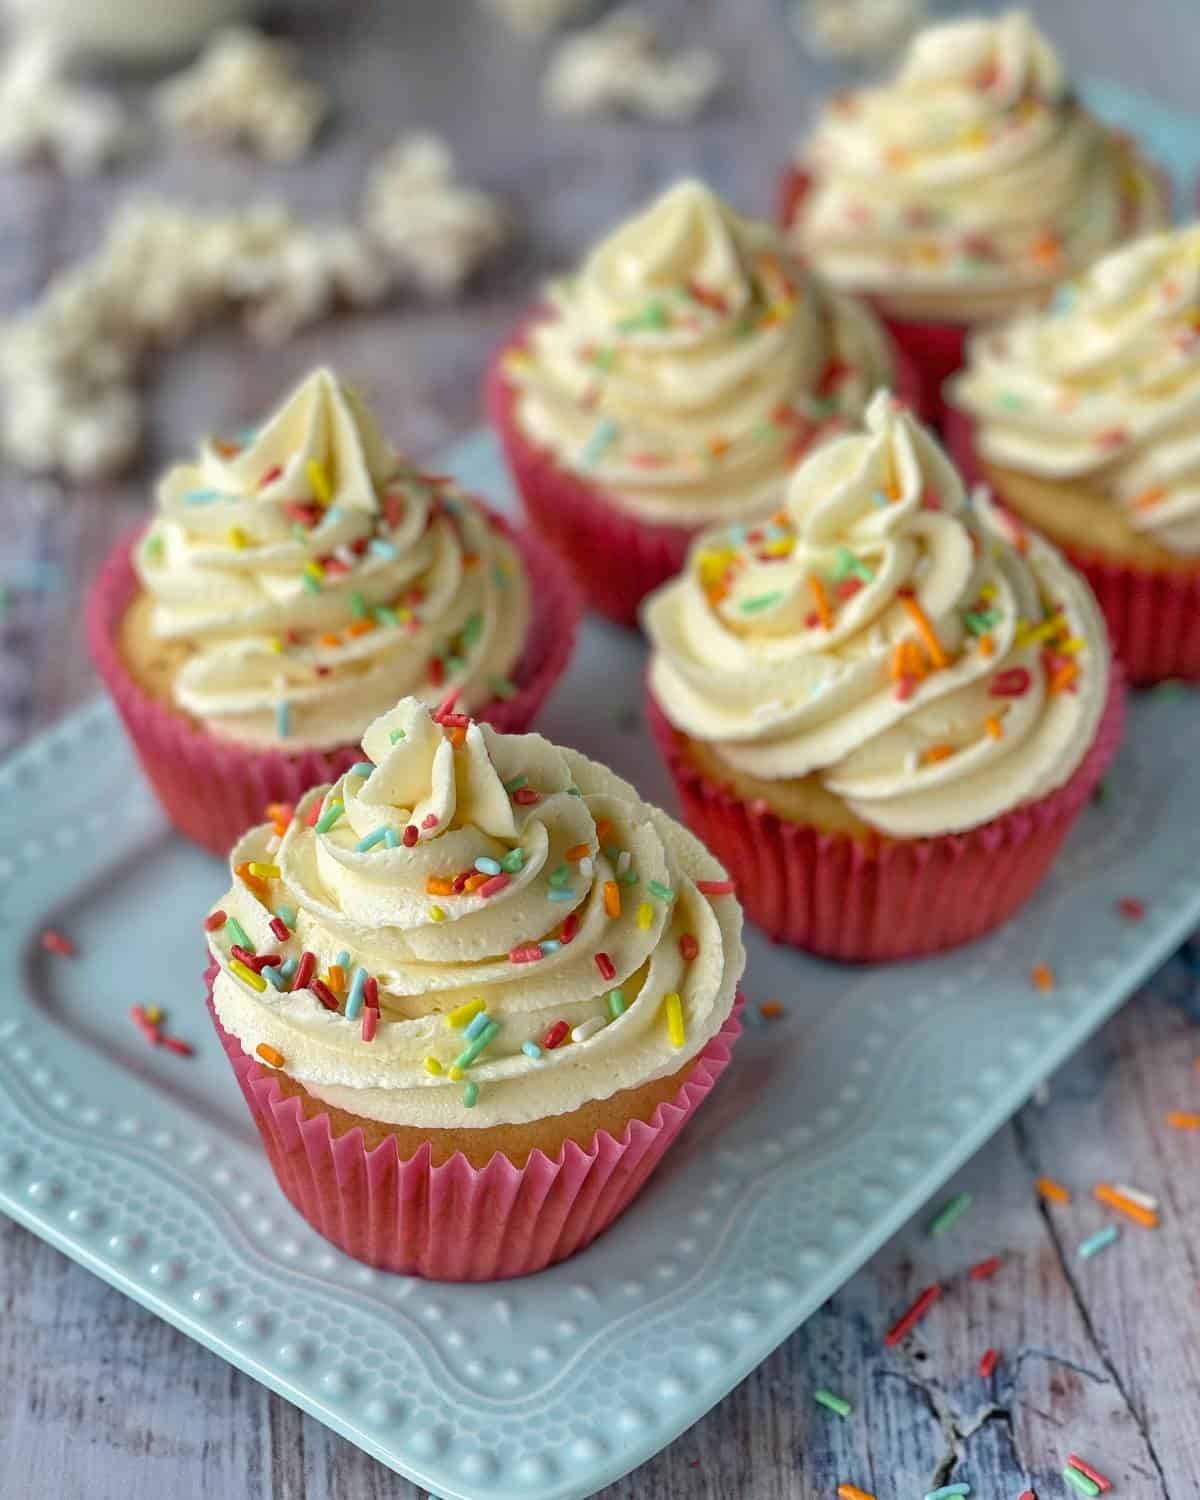 A close up shot of classic vanilla cupcakes with creamy butter icing and colourful sprinkles on top.